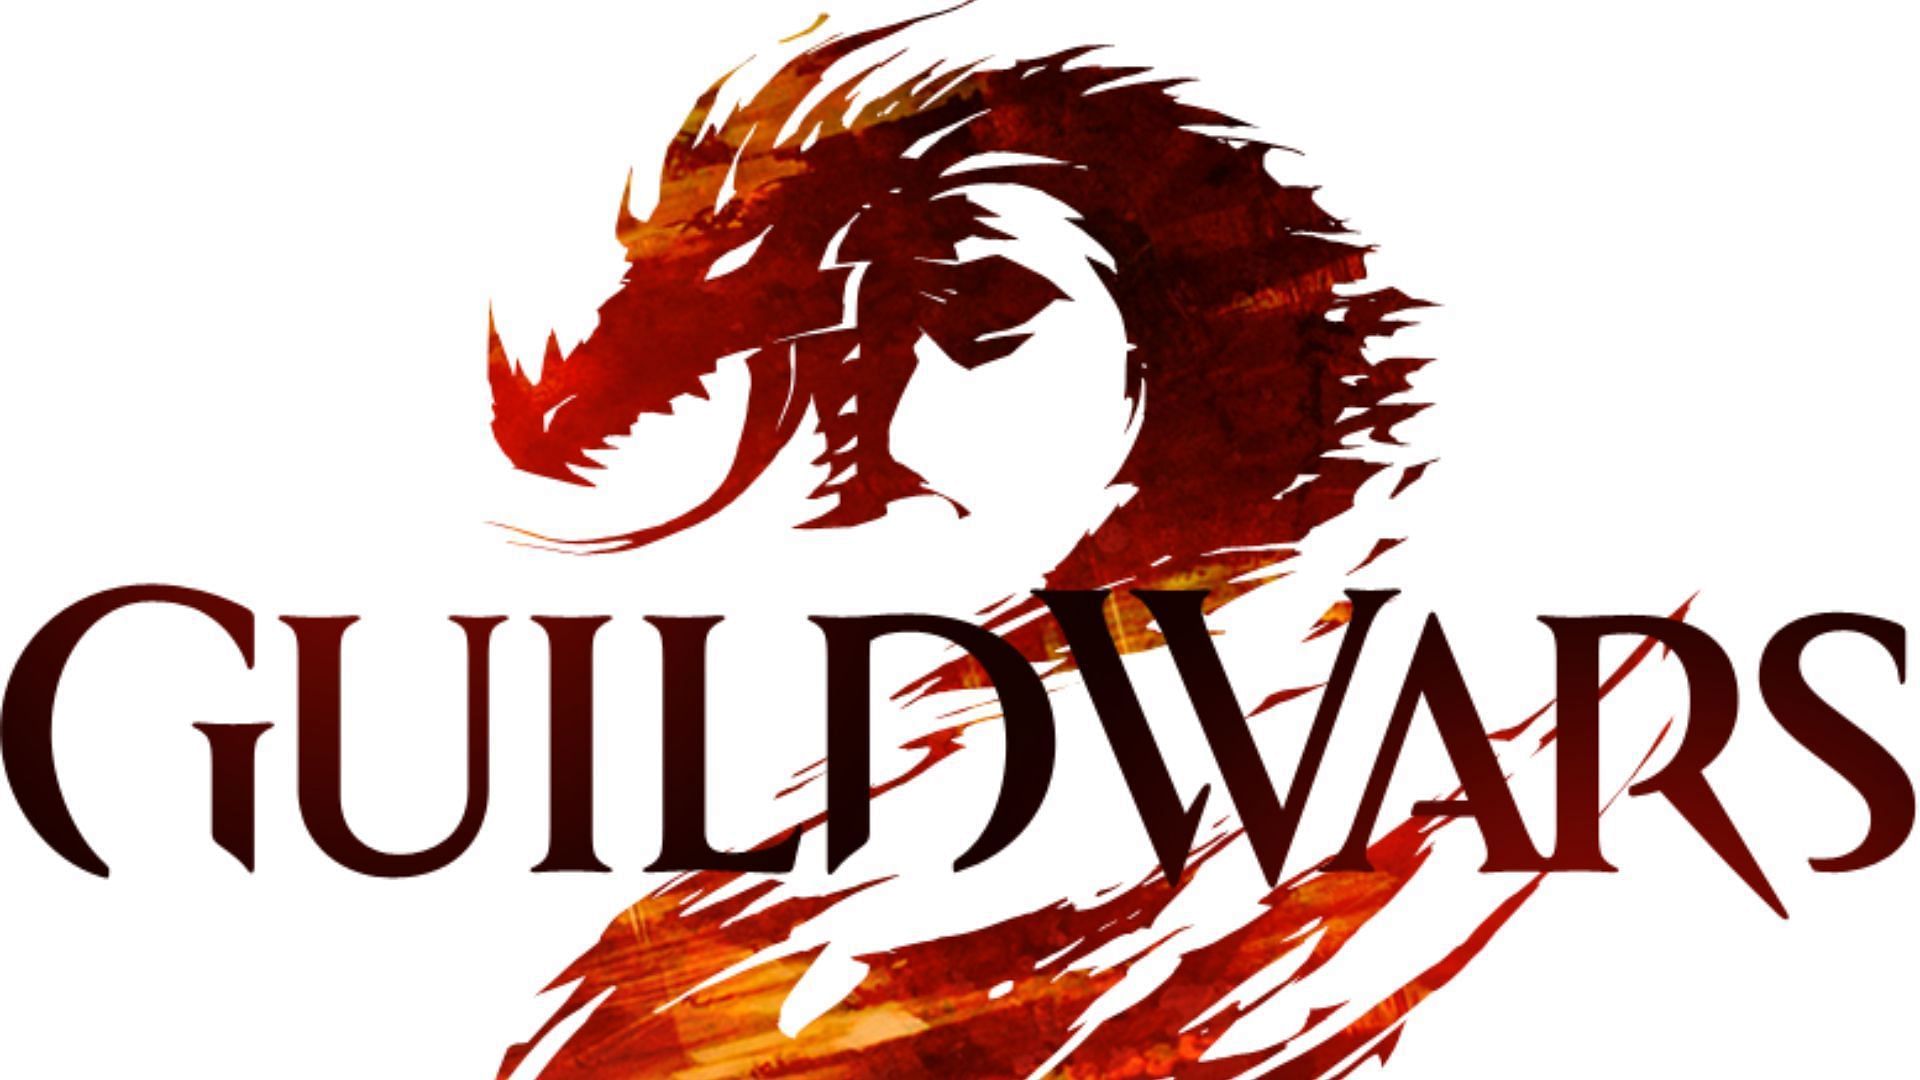 Guild Wars 2 offers a diverse MMO experience (Image via Studio Wildcard)